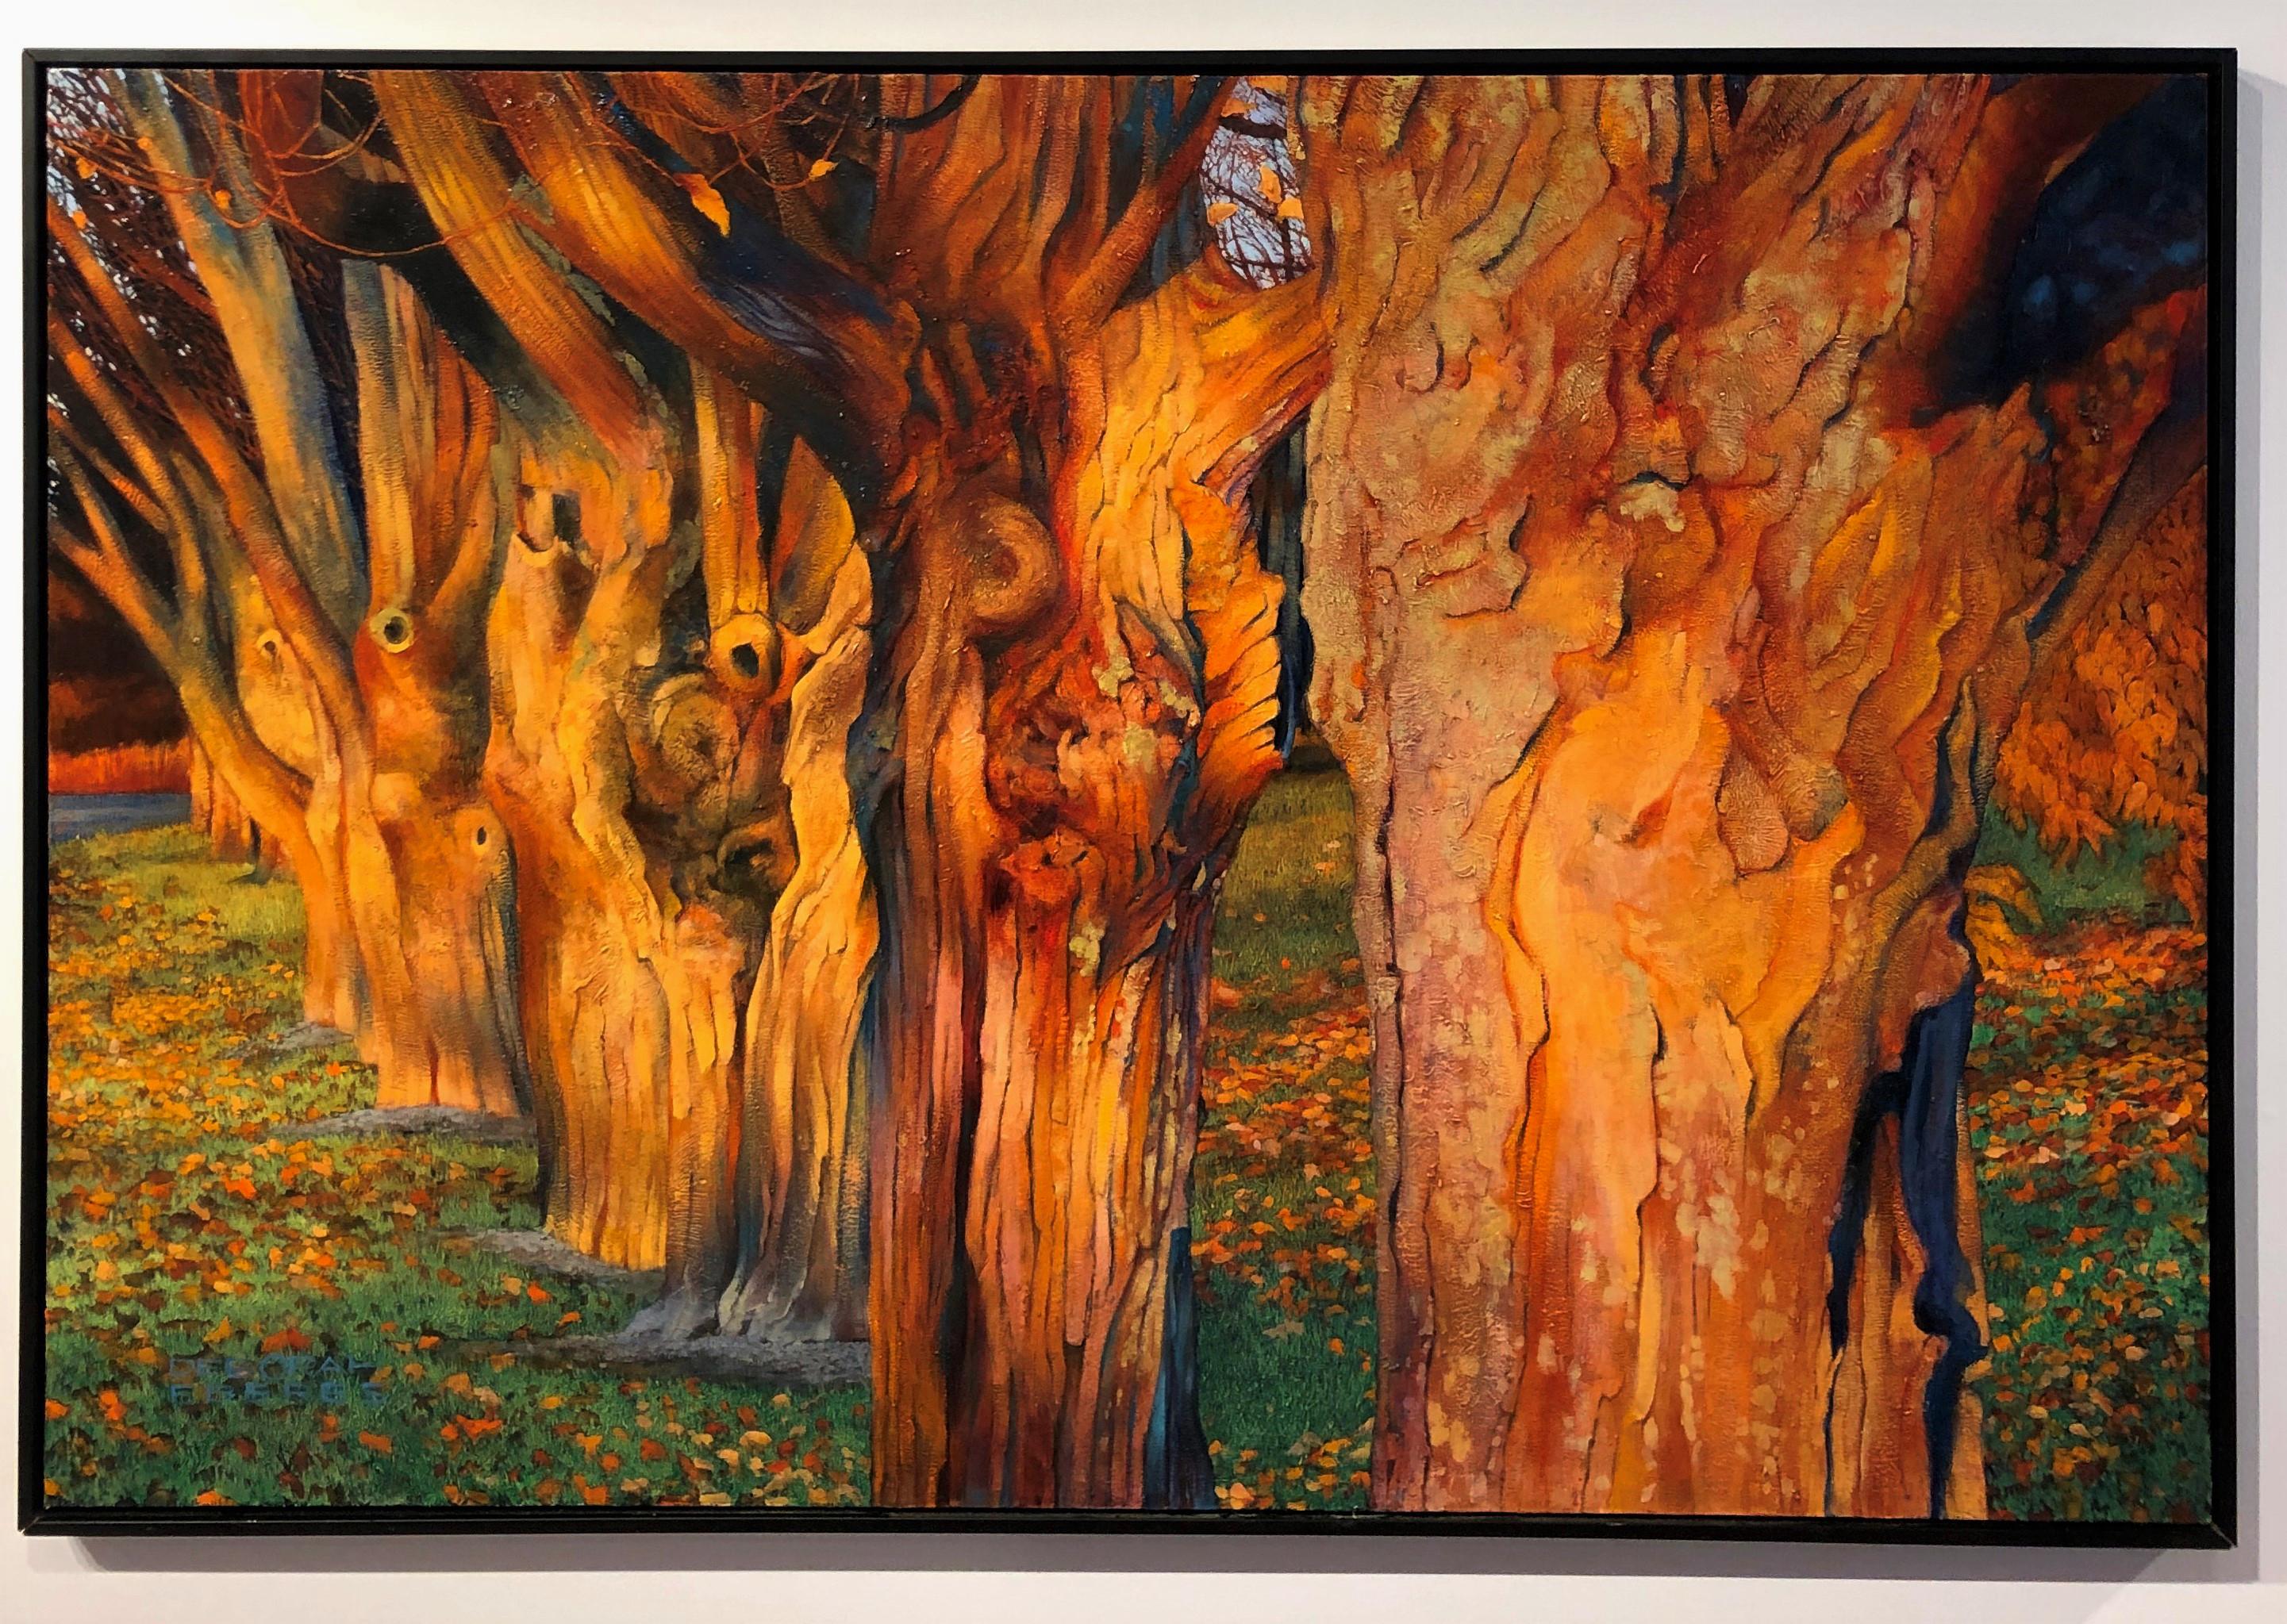 Witness Trees, Sugar Maples Bathed in Afternoon Light, Original Oil On Canvas - Painting by Deborah Ebbers